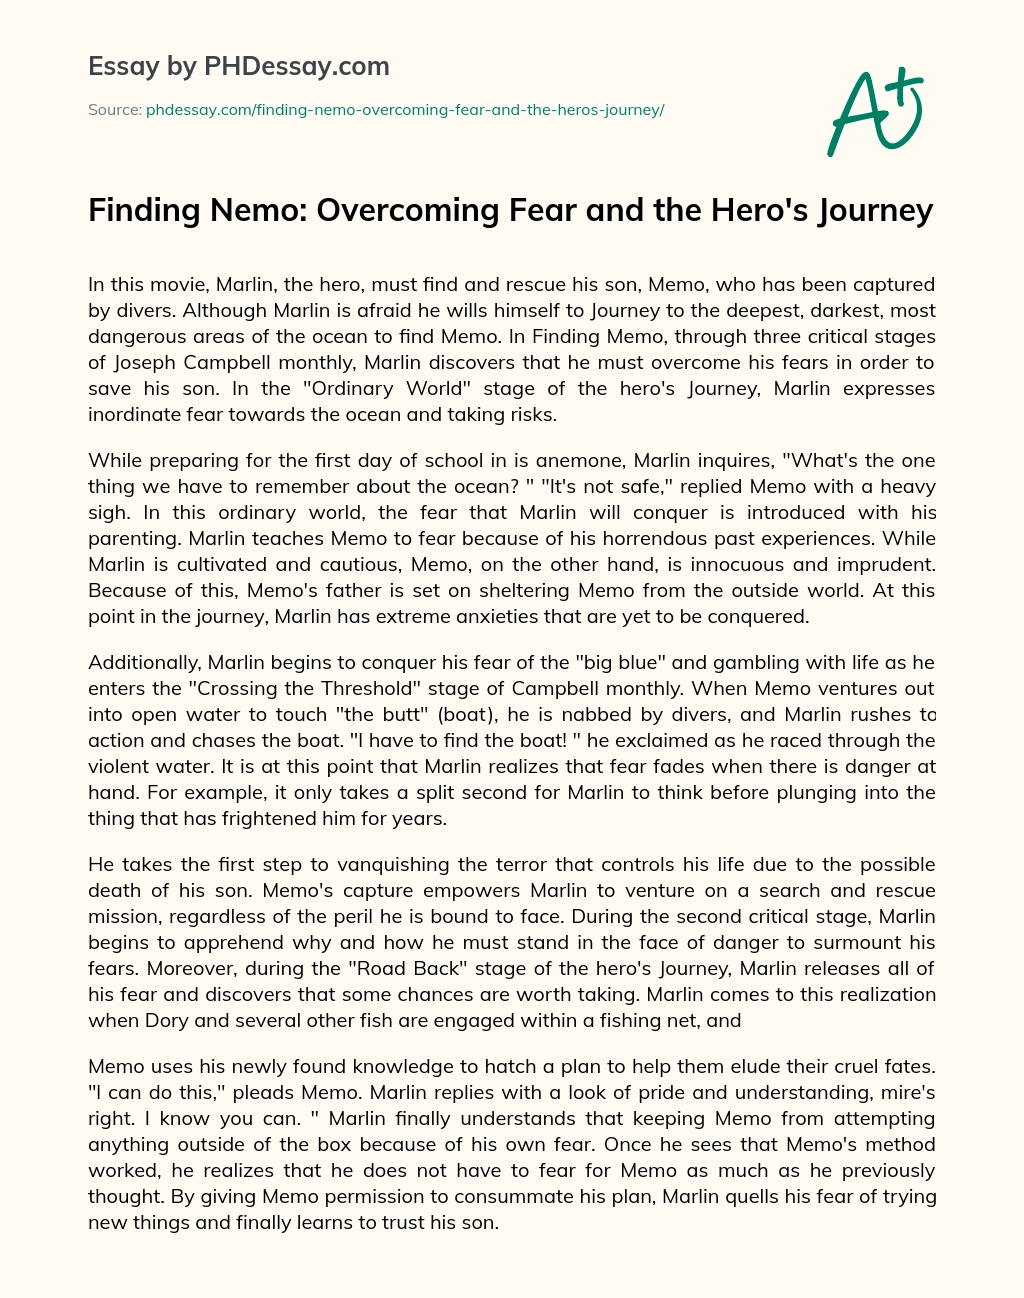 Finding Nemo: Overcoming Fear and the Hero’s Journey essay